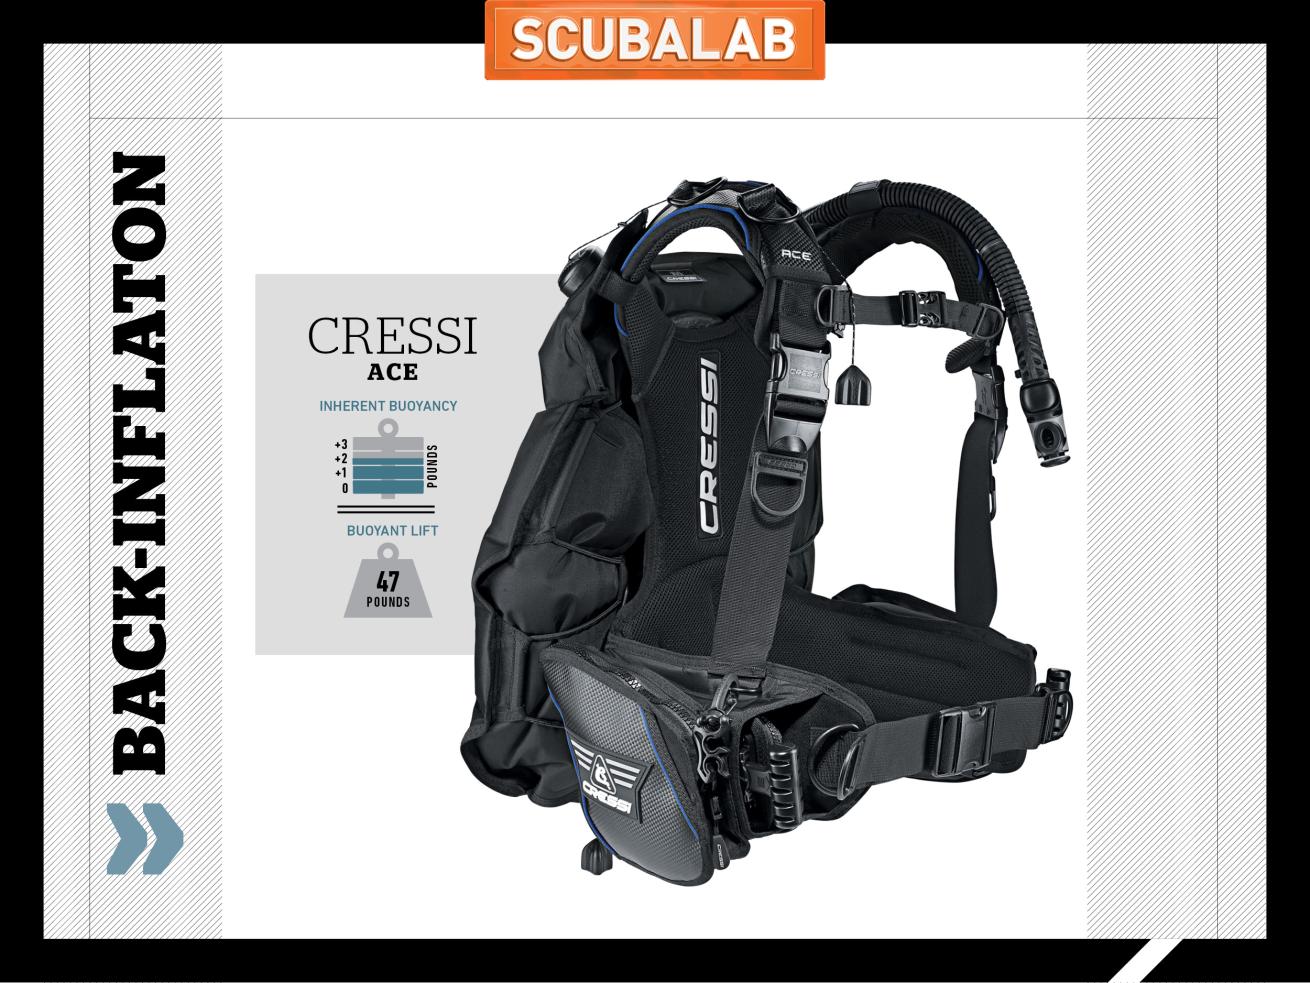 Cressi Ace scuba diving BC back-inflate ScubaLab review